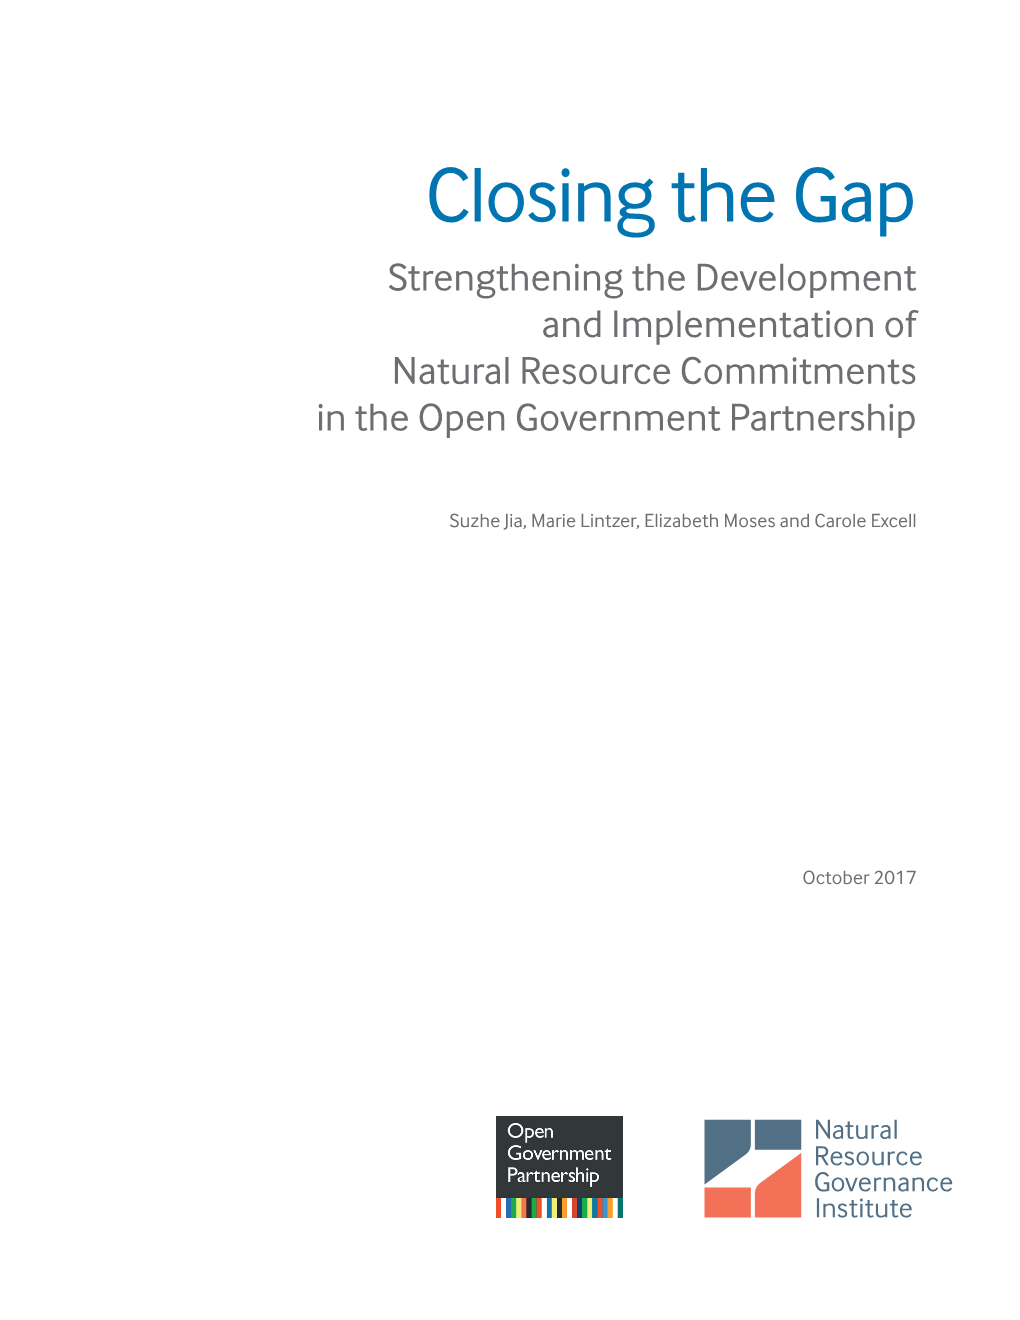 Closing the Gap Strengthening the Development and Implementation of Natural Resource Commitments in the Open Government Partnership